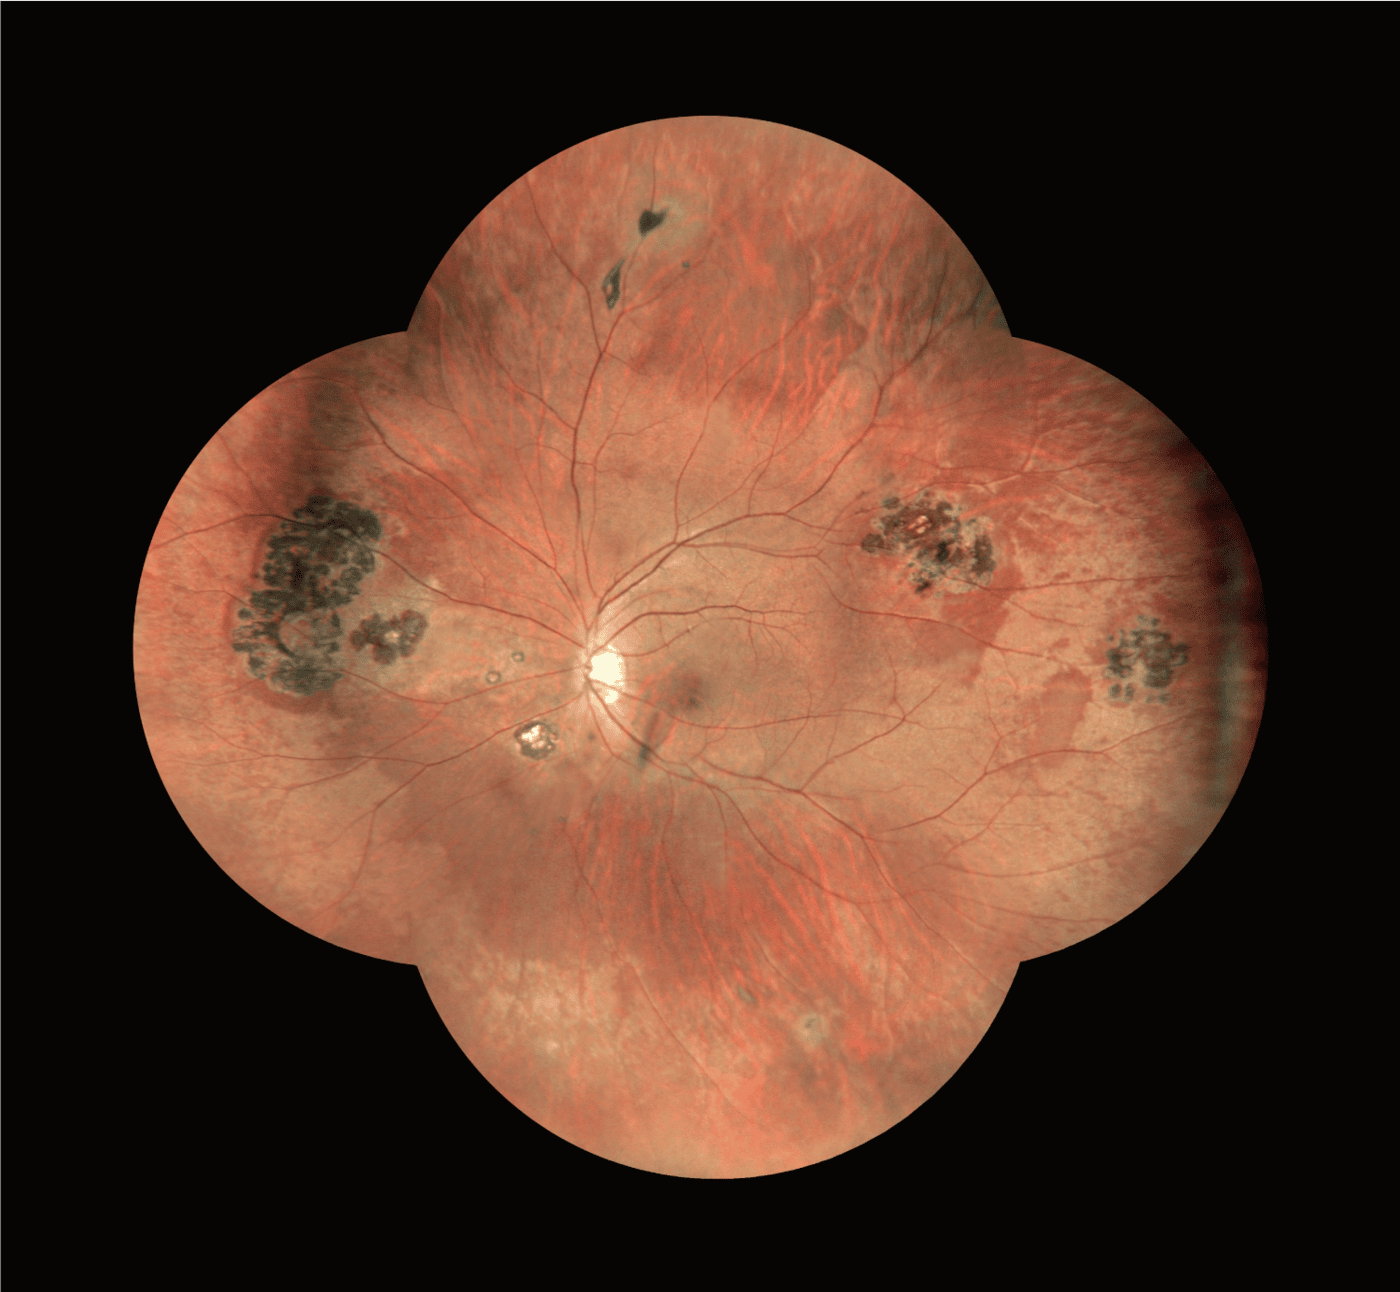 A Detailed Retinal Image Captured With Nidek Technology Shows The Optic Nerve, Blood Vessels, And Irregular Dark Patches. The Central Area Appears Pale, While The Surrounding Tissue Has Red And Brown Hues. The Image Resembles A Clover Shape, Indicating Multiple Frames Stitched Together.